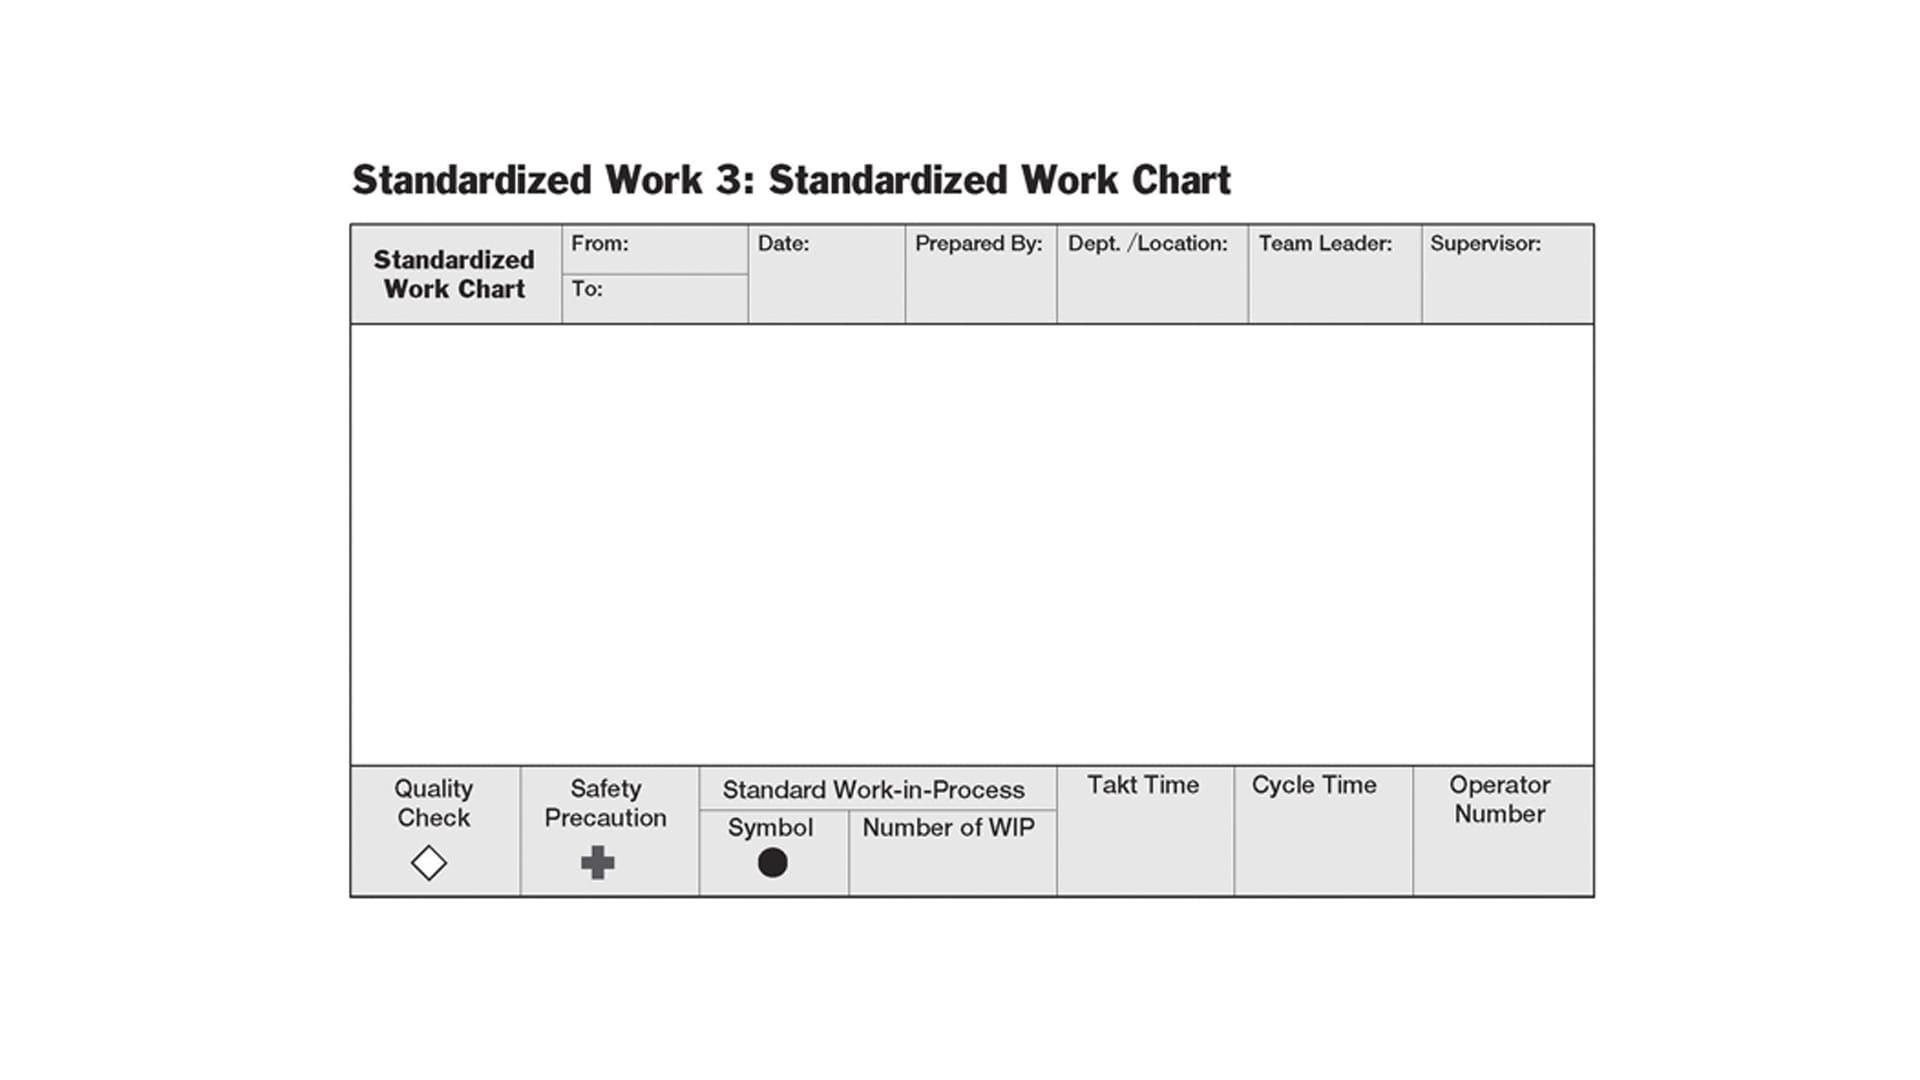 What is an example of LEAN standard work?